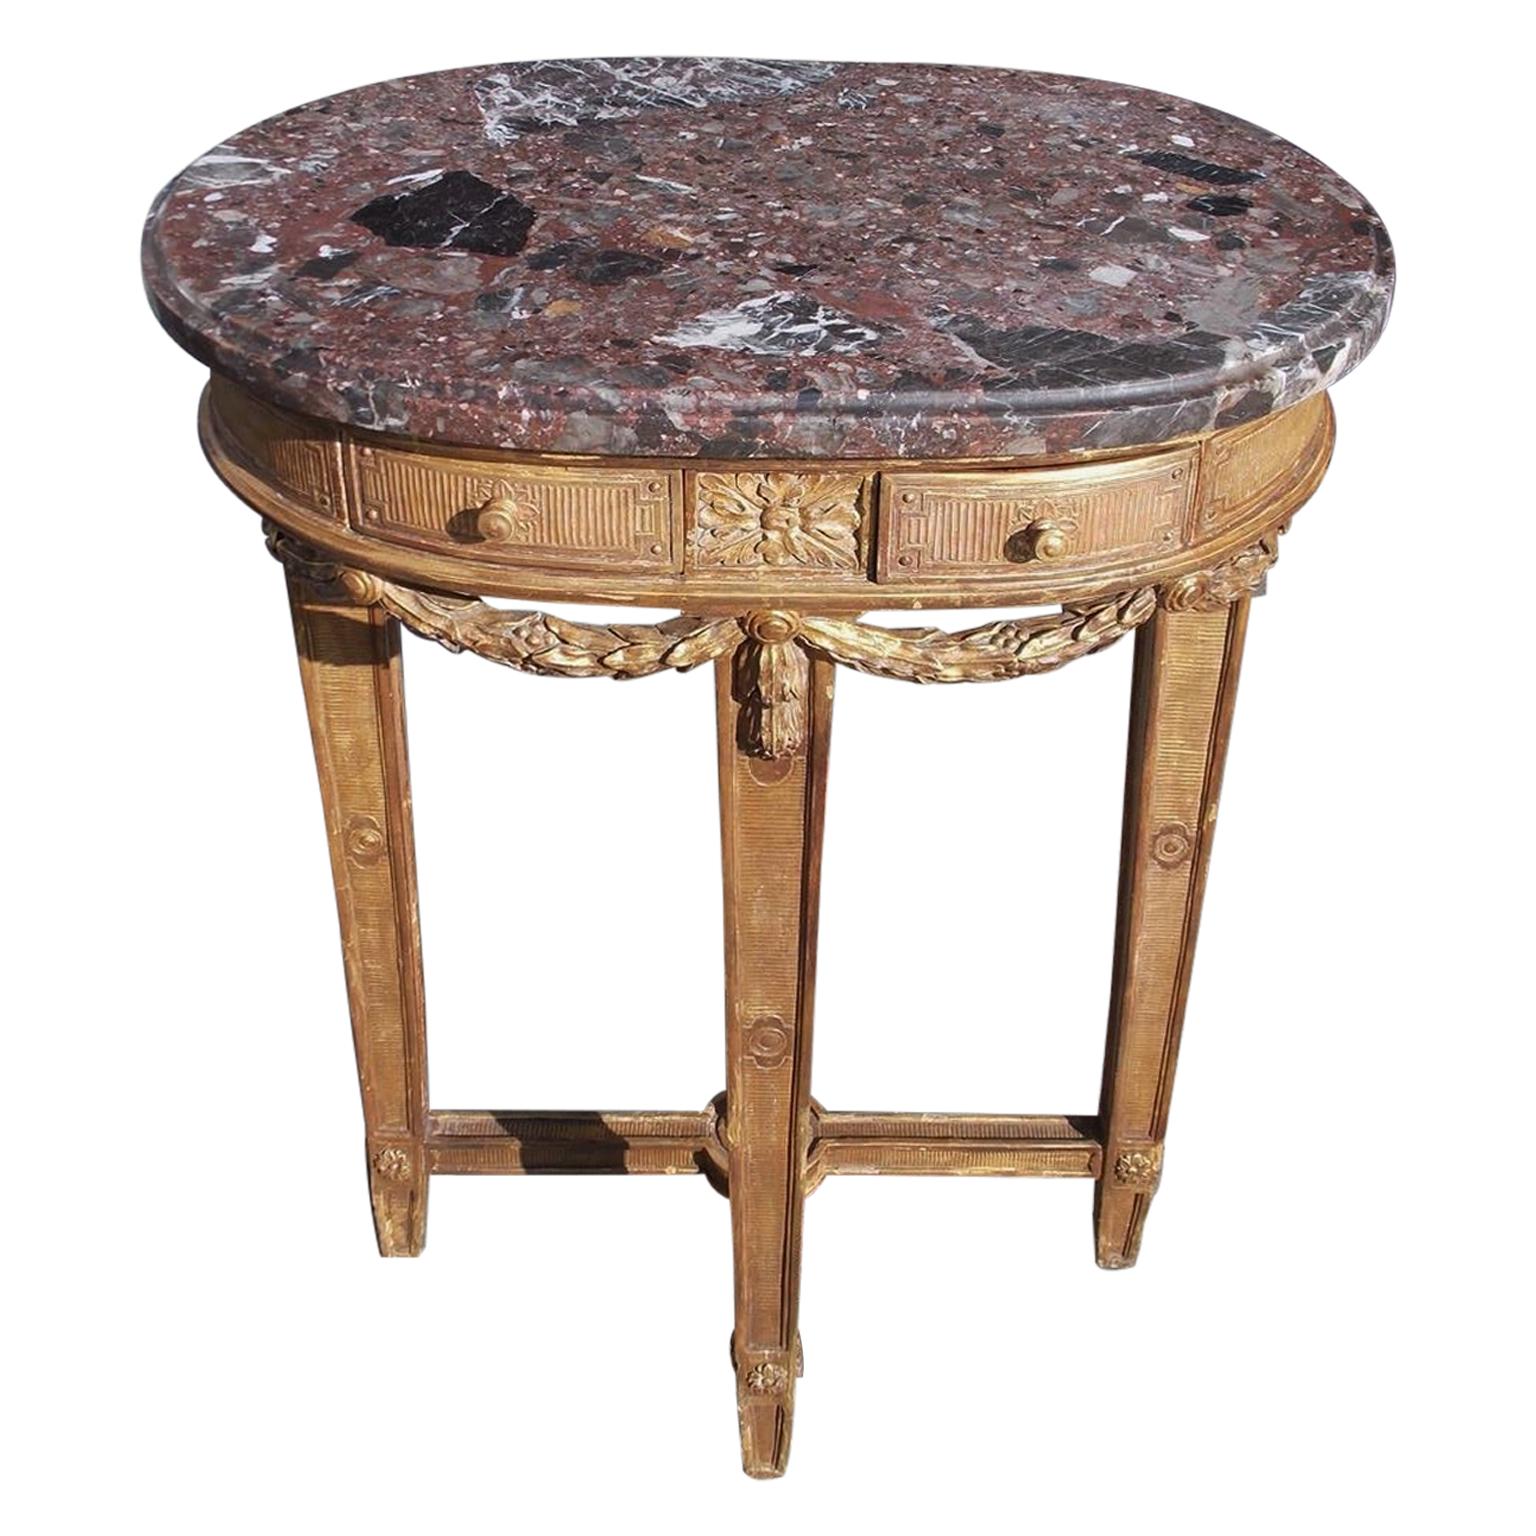 French Oval Gilt wood Marble Side Table with Floral Medallion & Swags, C. 1780